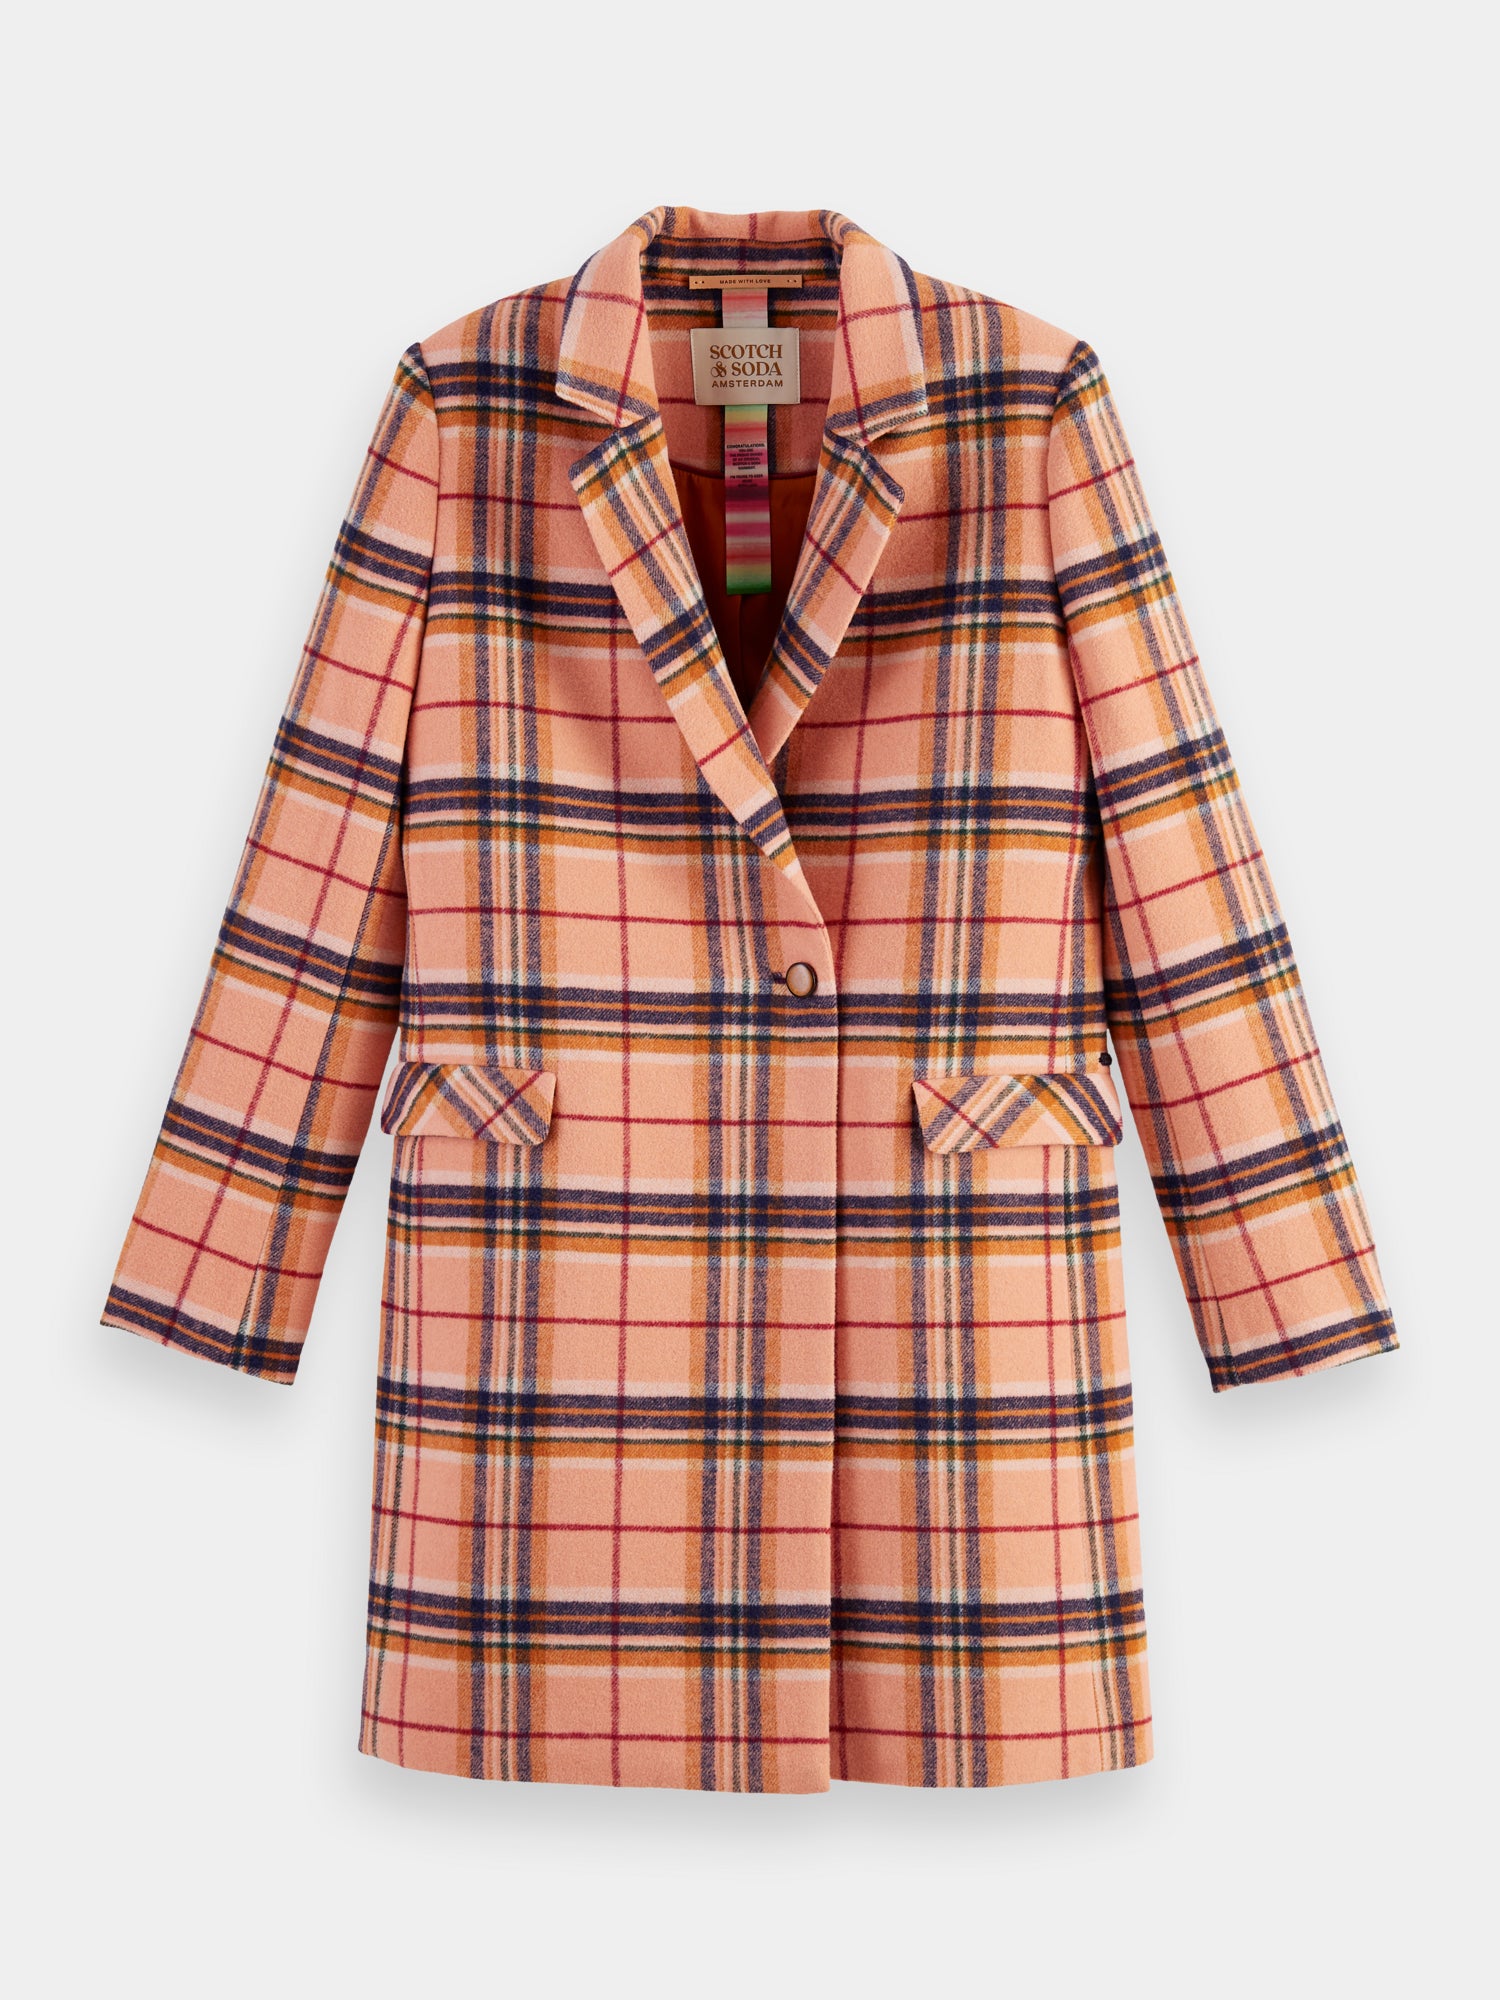 Scotch & Soda Women's Double Breasted Tailored Coat in Wool Blend